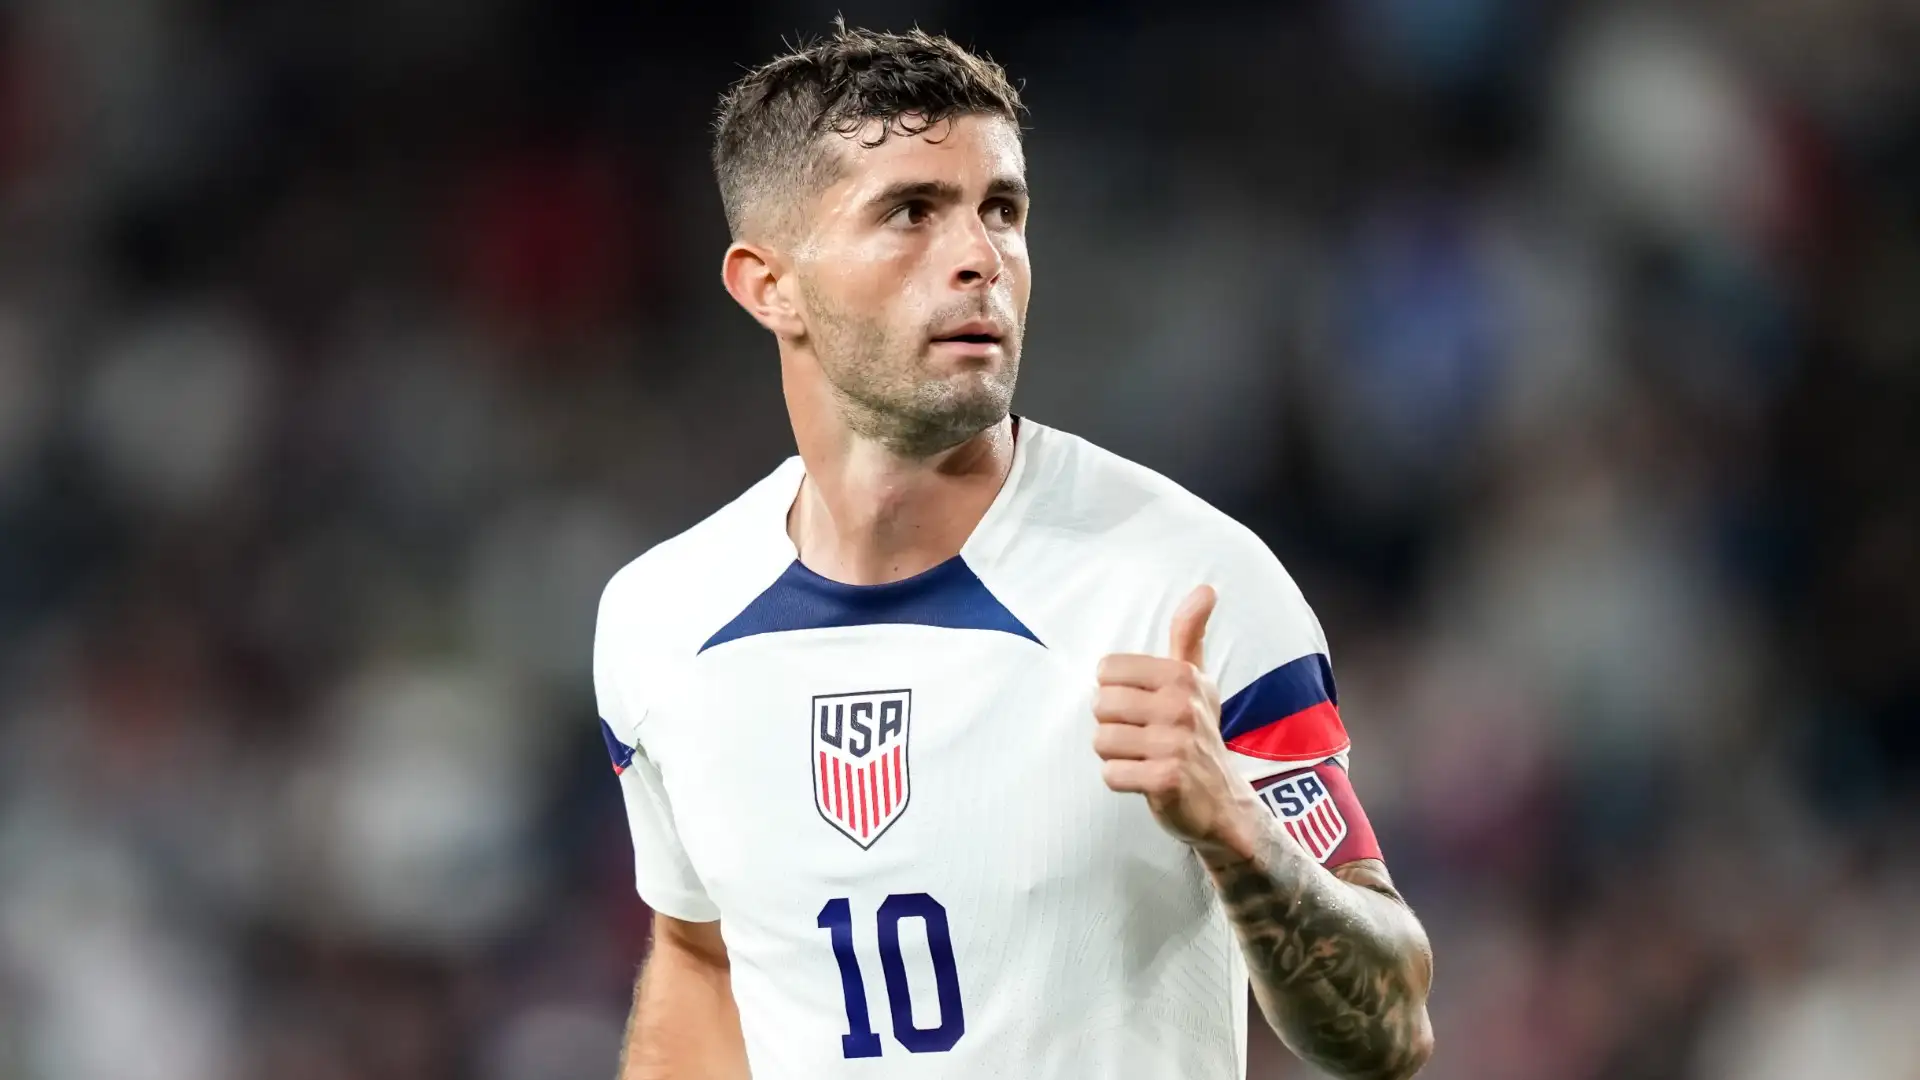 VIDEO: USMNT star Christian Pulisic reveals surprising trio of players who influenced him as he snubs Lionel Messi & Cristiano Ronaldo